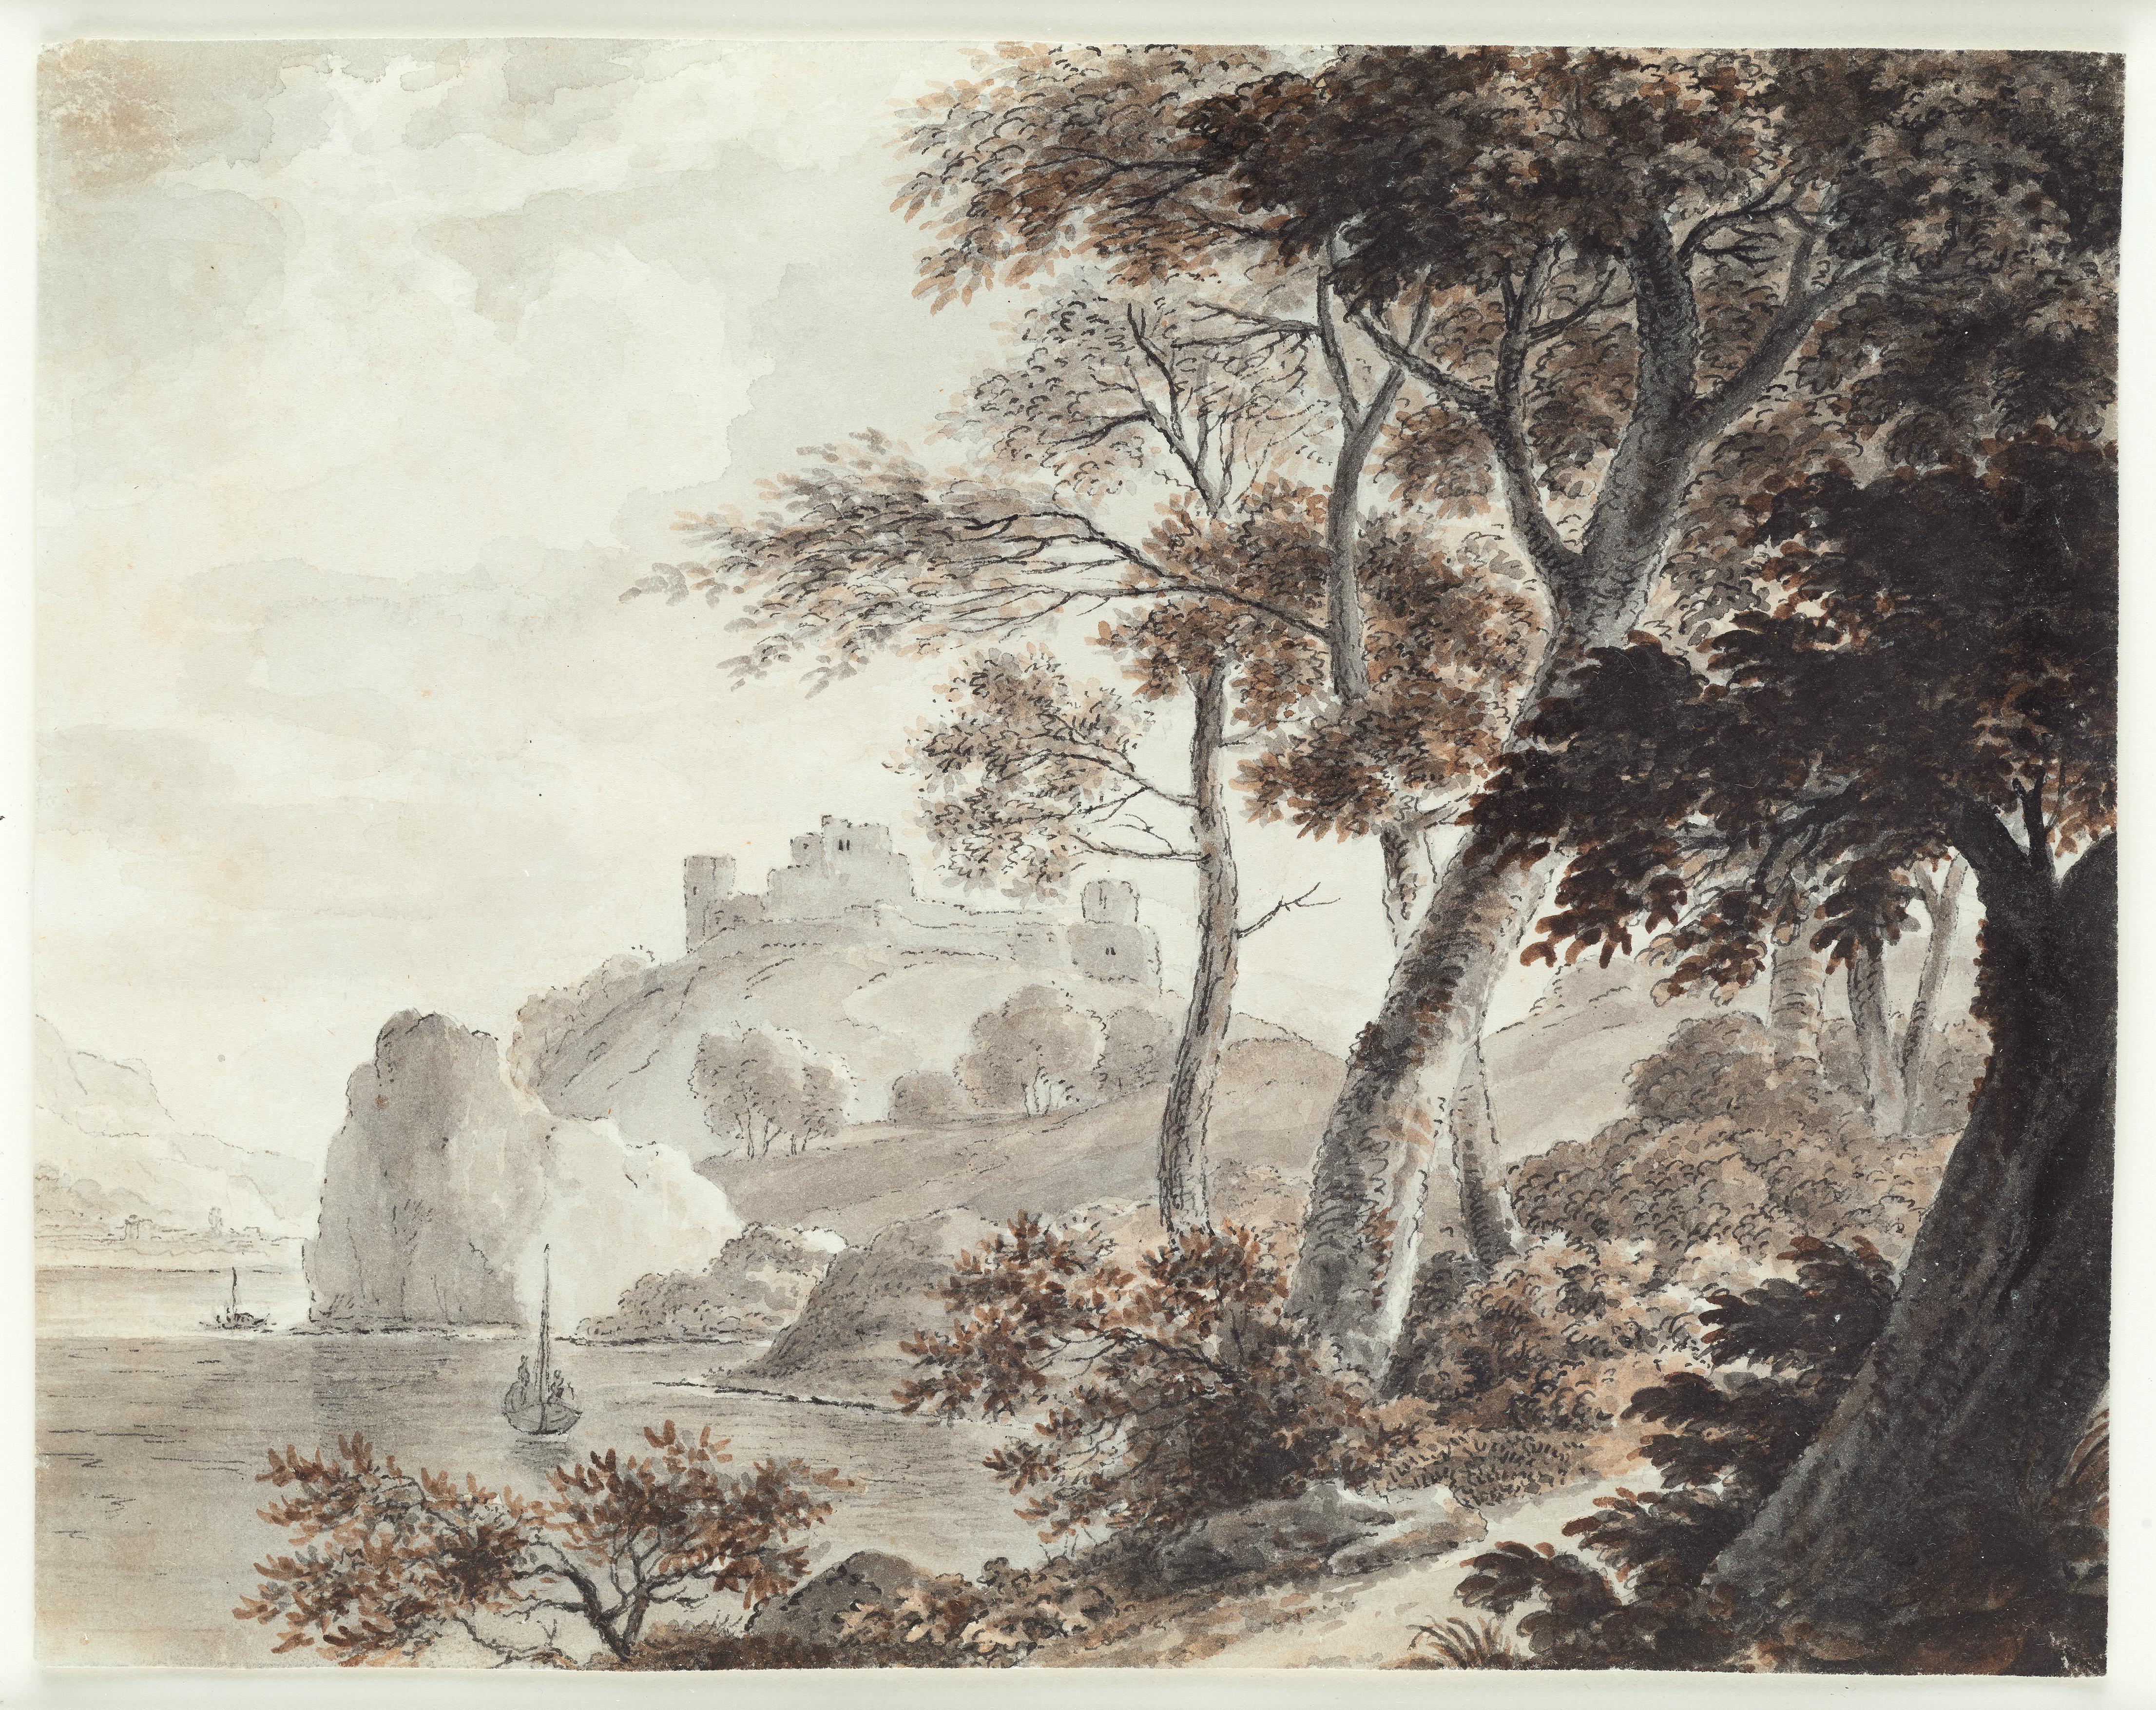 Southern Landscape, Ships, Old Master Drawing, 19th Century, by Von Stengel